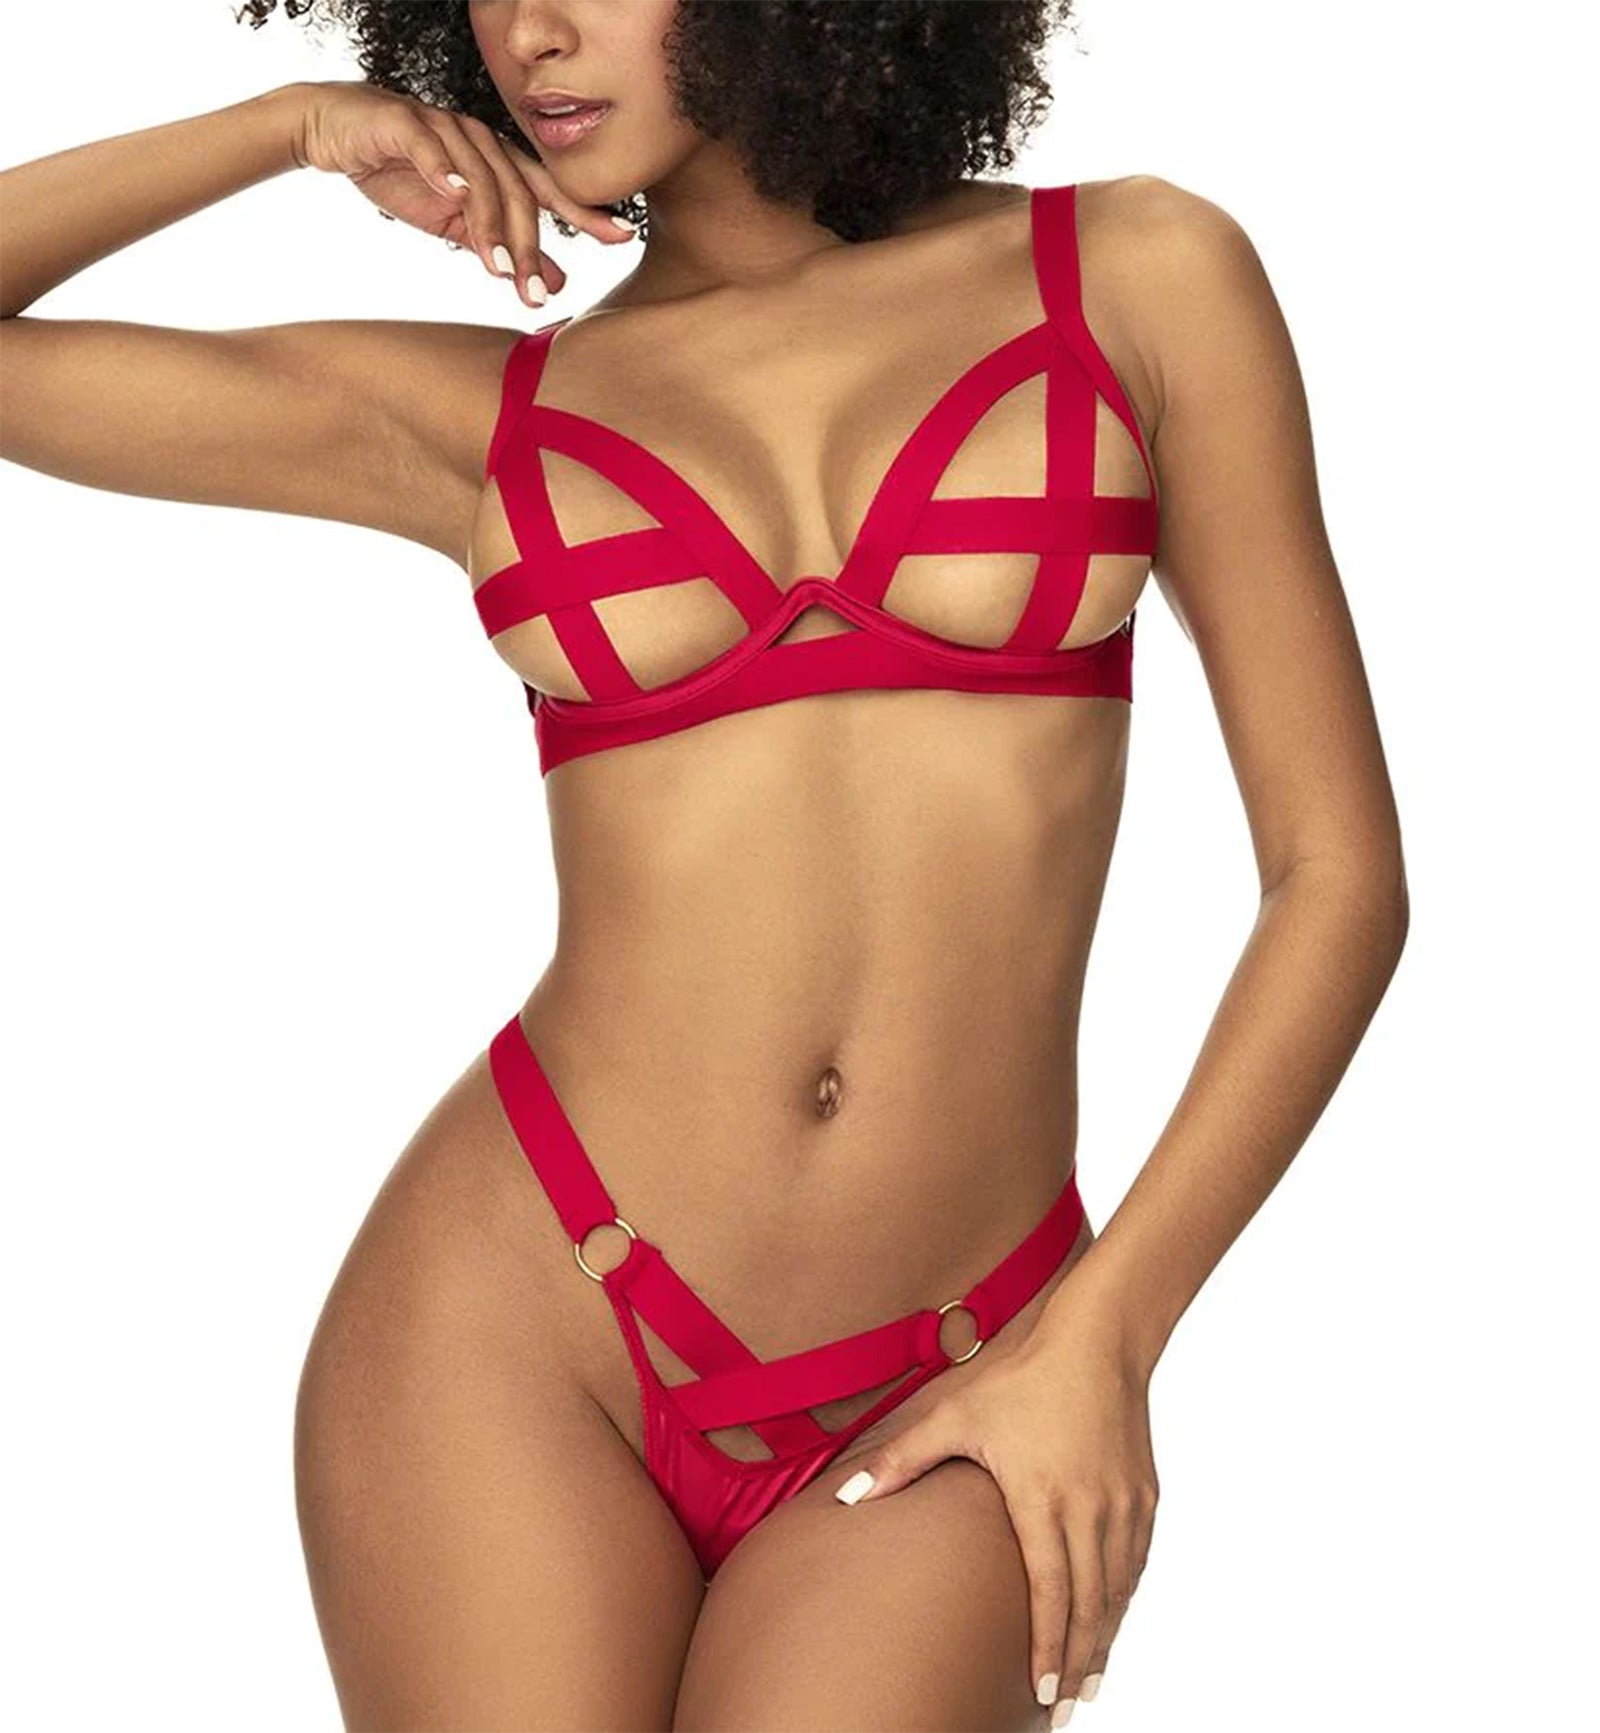 Mapale 2 Piece Set: Ouvert Cage Bra and Thong (2737),S/M,Red - Red,S/M